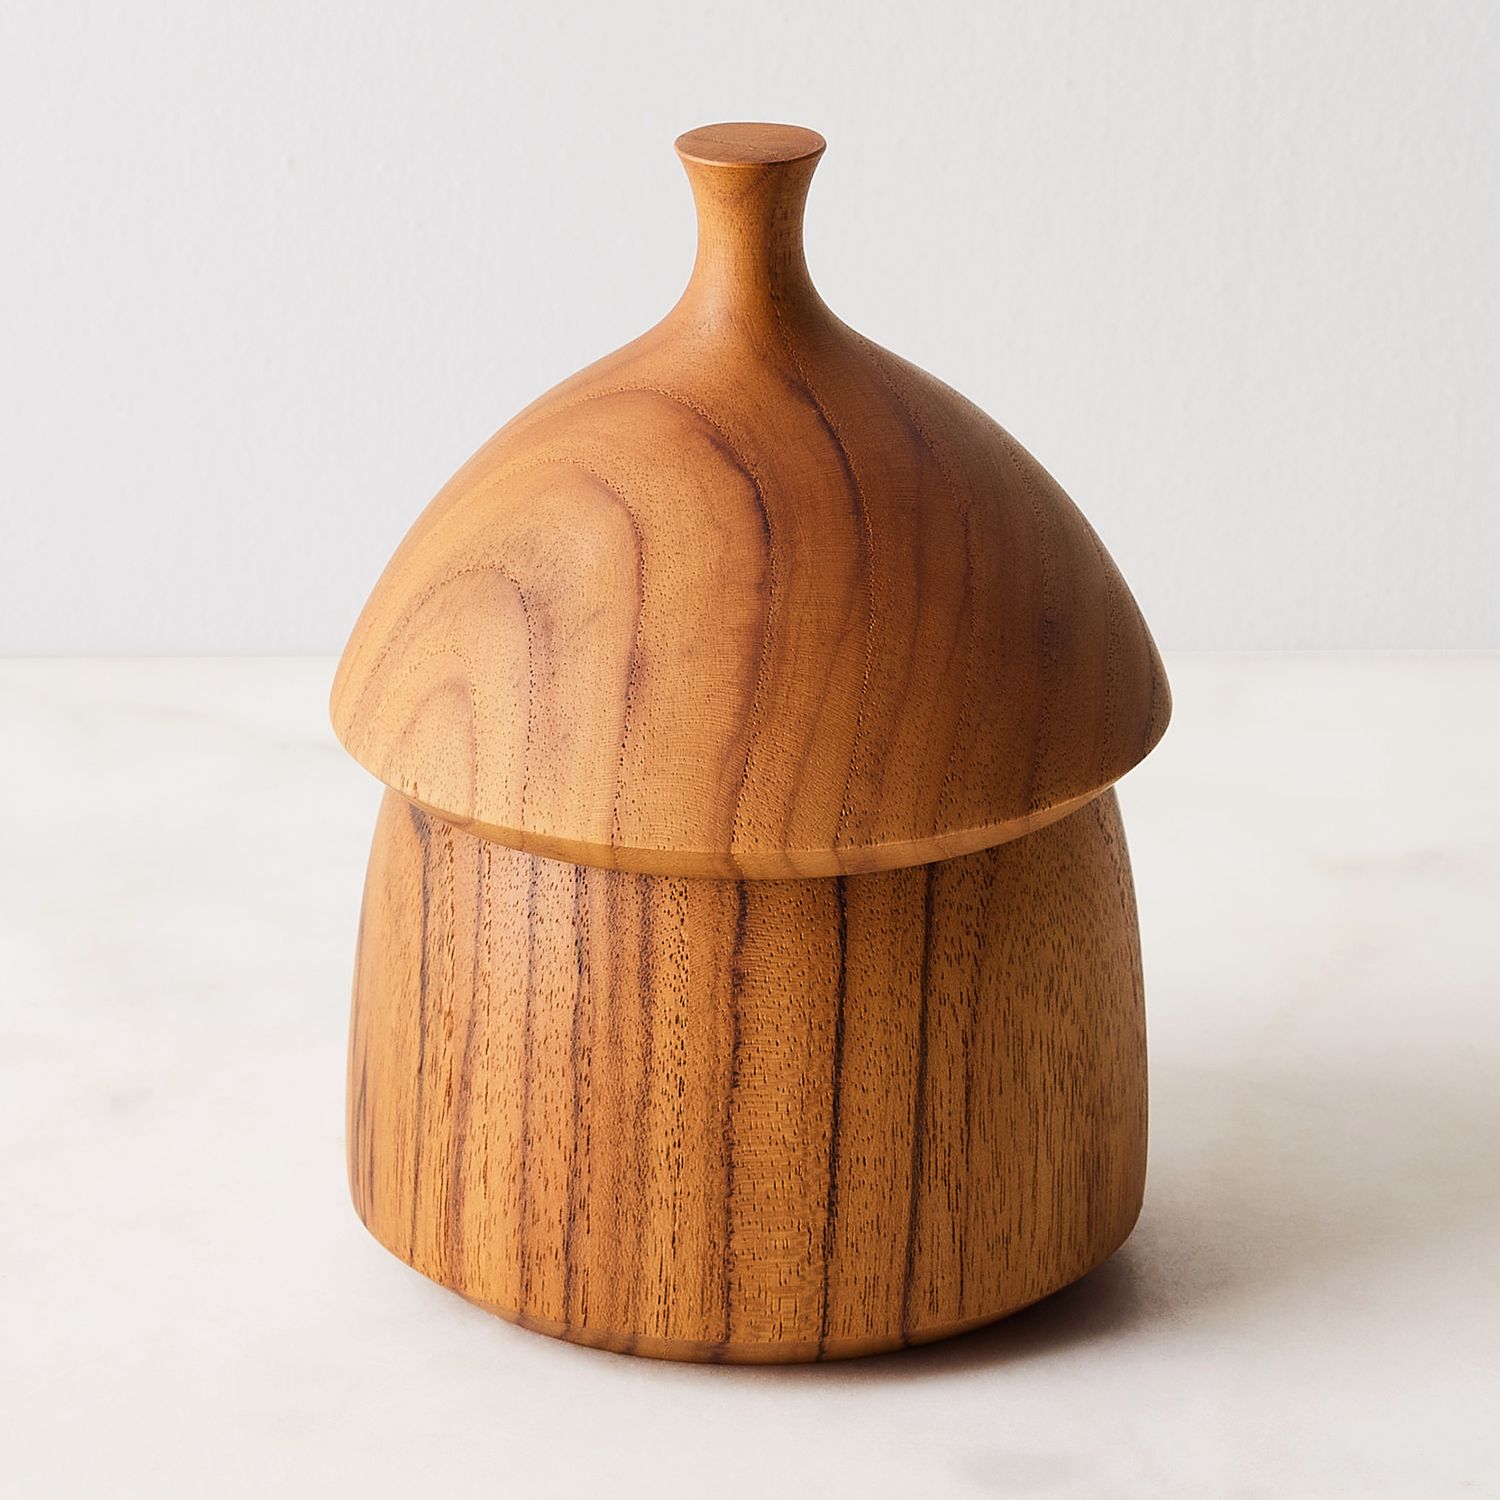 Teak Wood Spice Containers - Durable, Artisan-Made